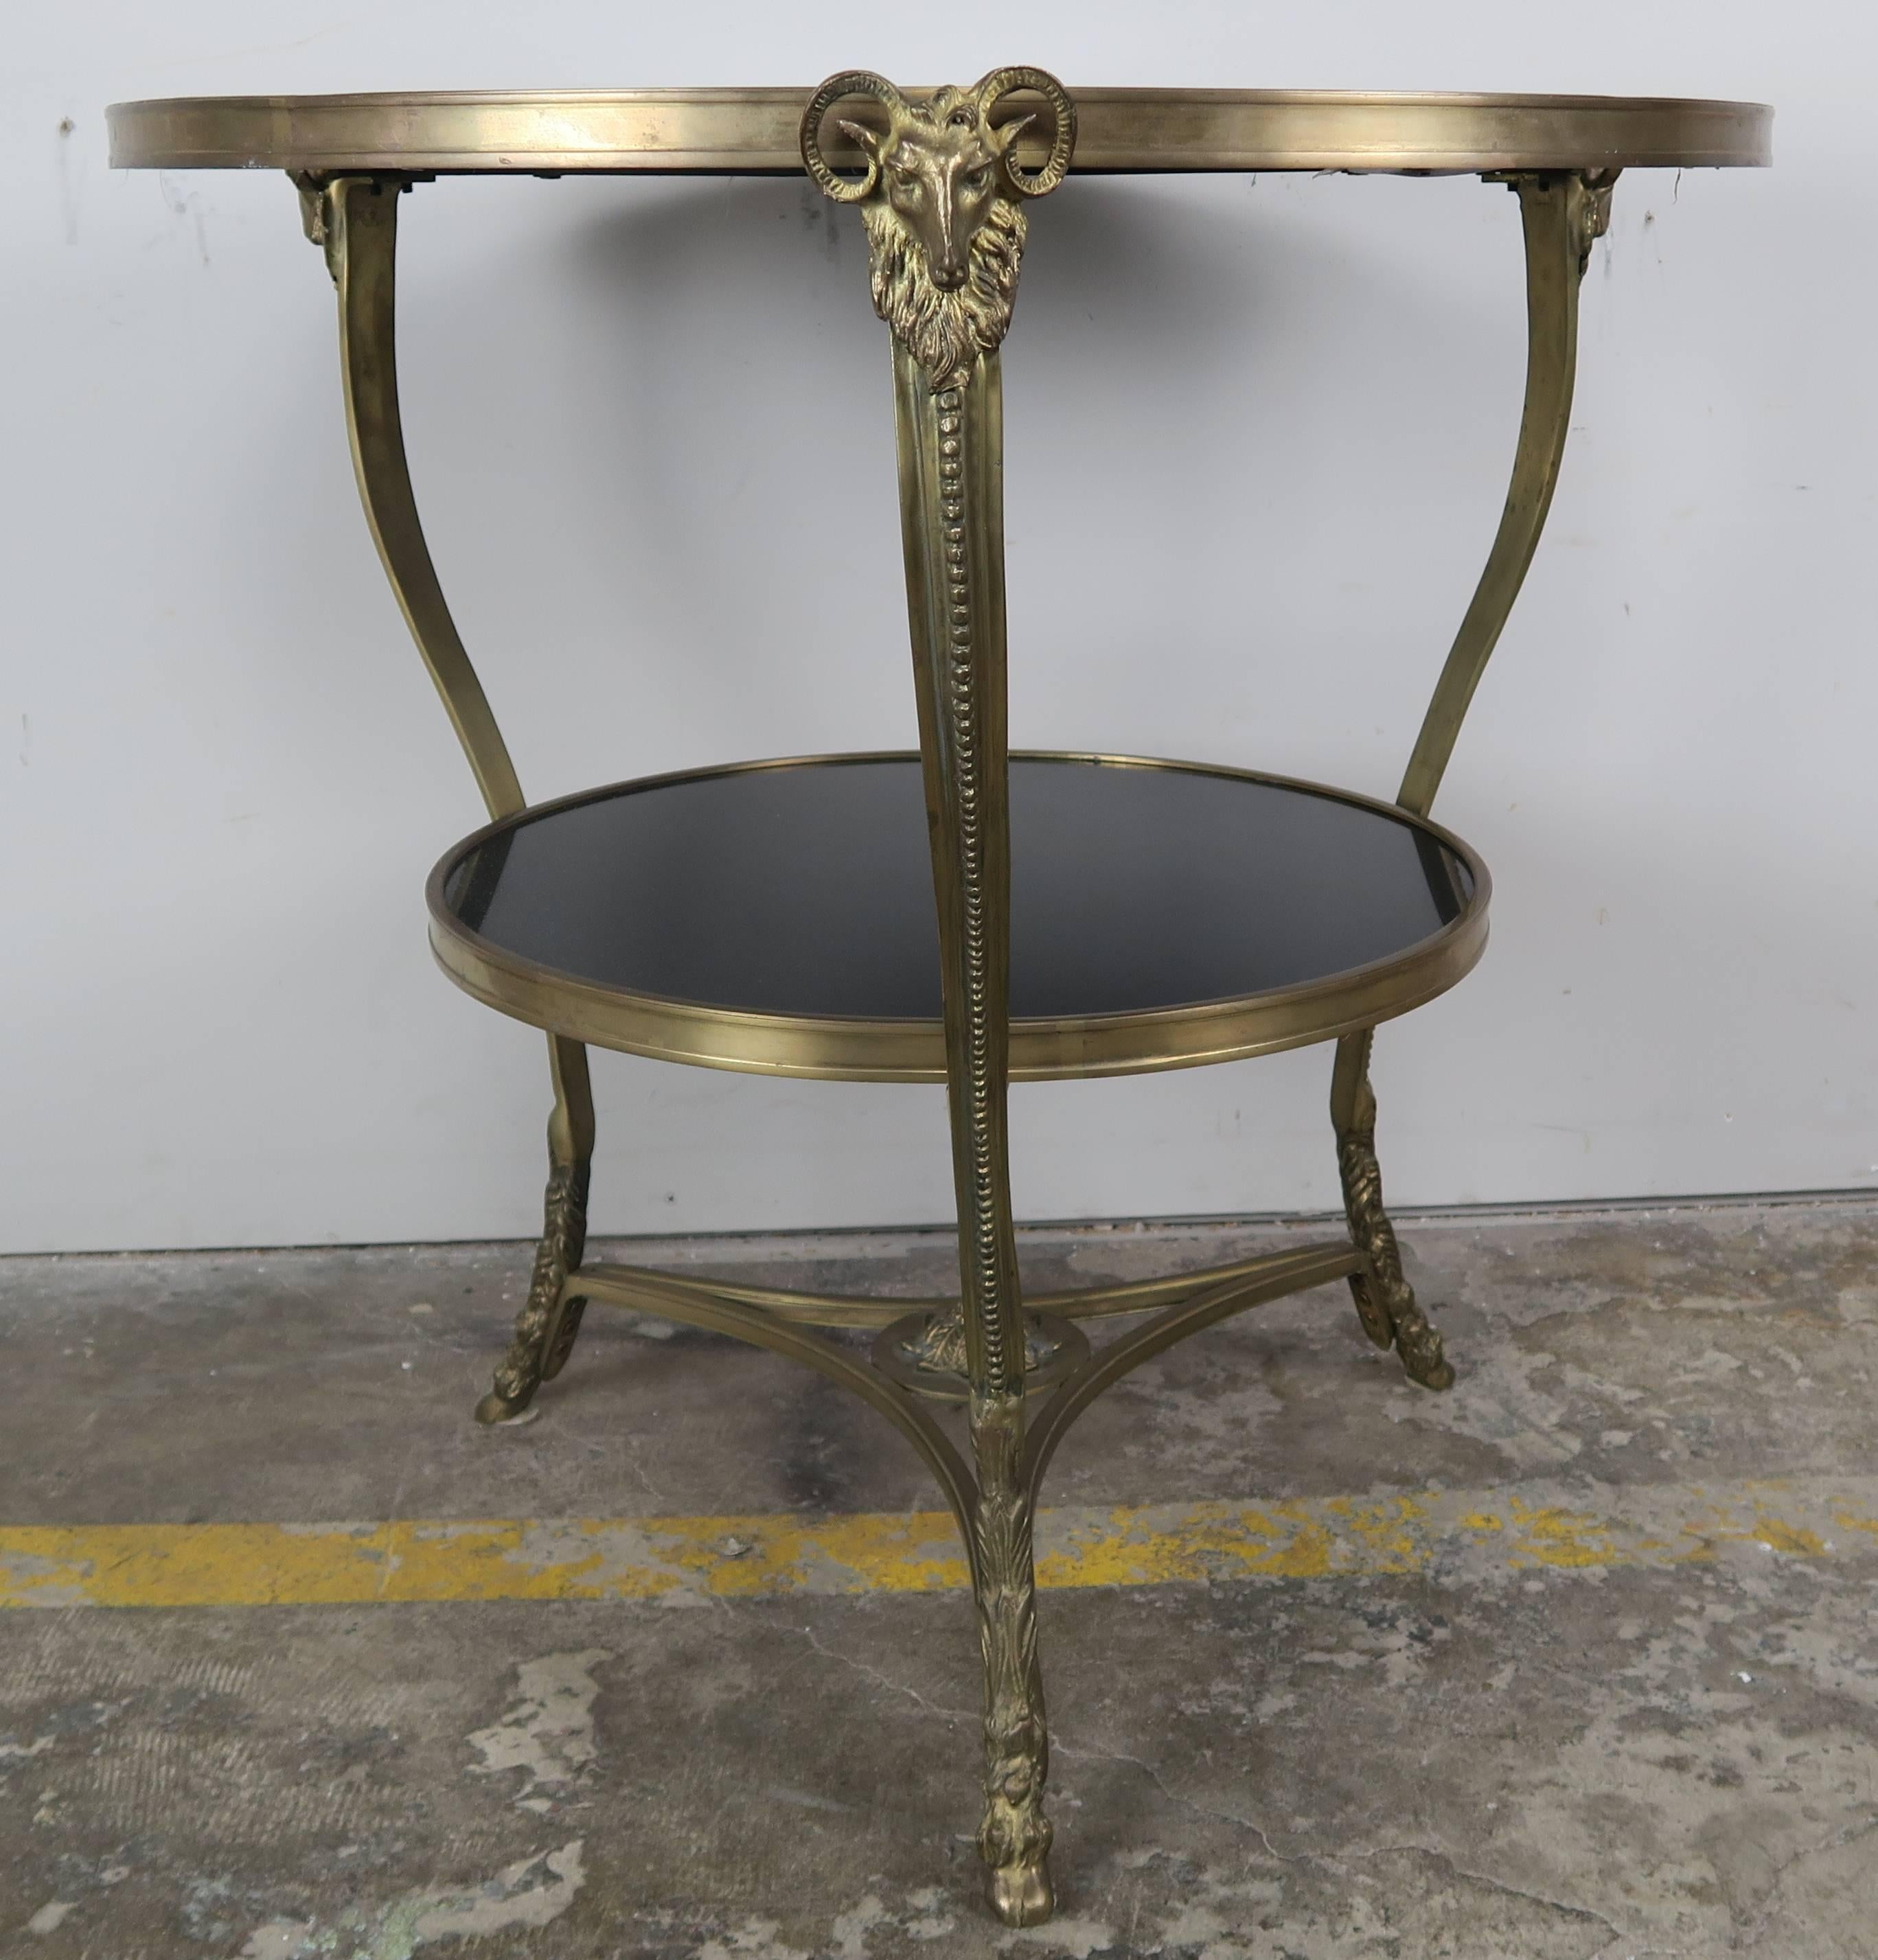 French cast bronze and black stone two-tier tripod gueridon table with ram's head detail.